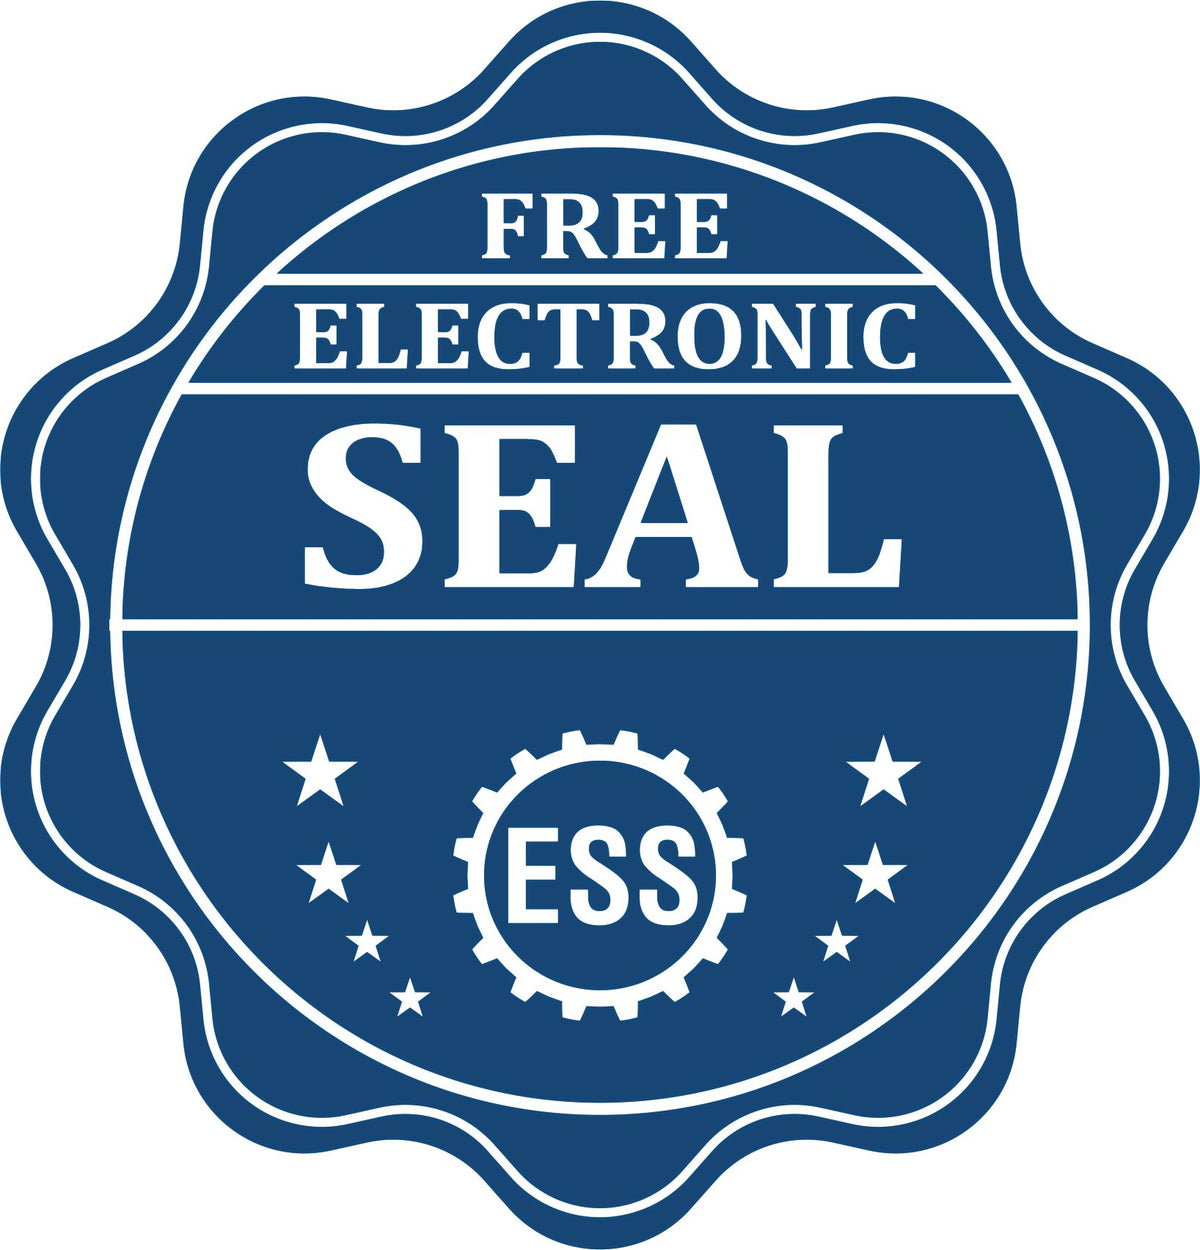 A badge showing a free electronic seal for the Heavy-Duty Maine Rectangular Notary Stamp with stars and the ESS gear on the emblem.